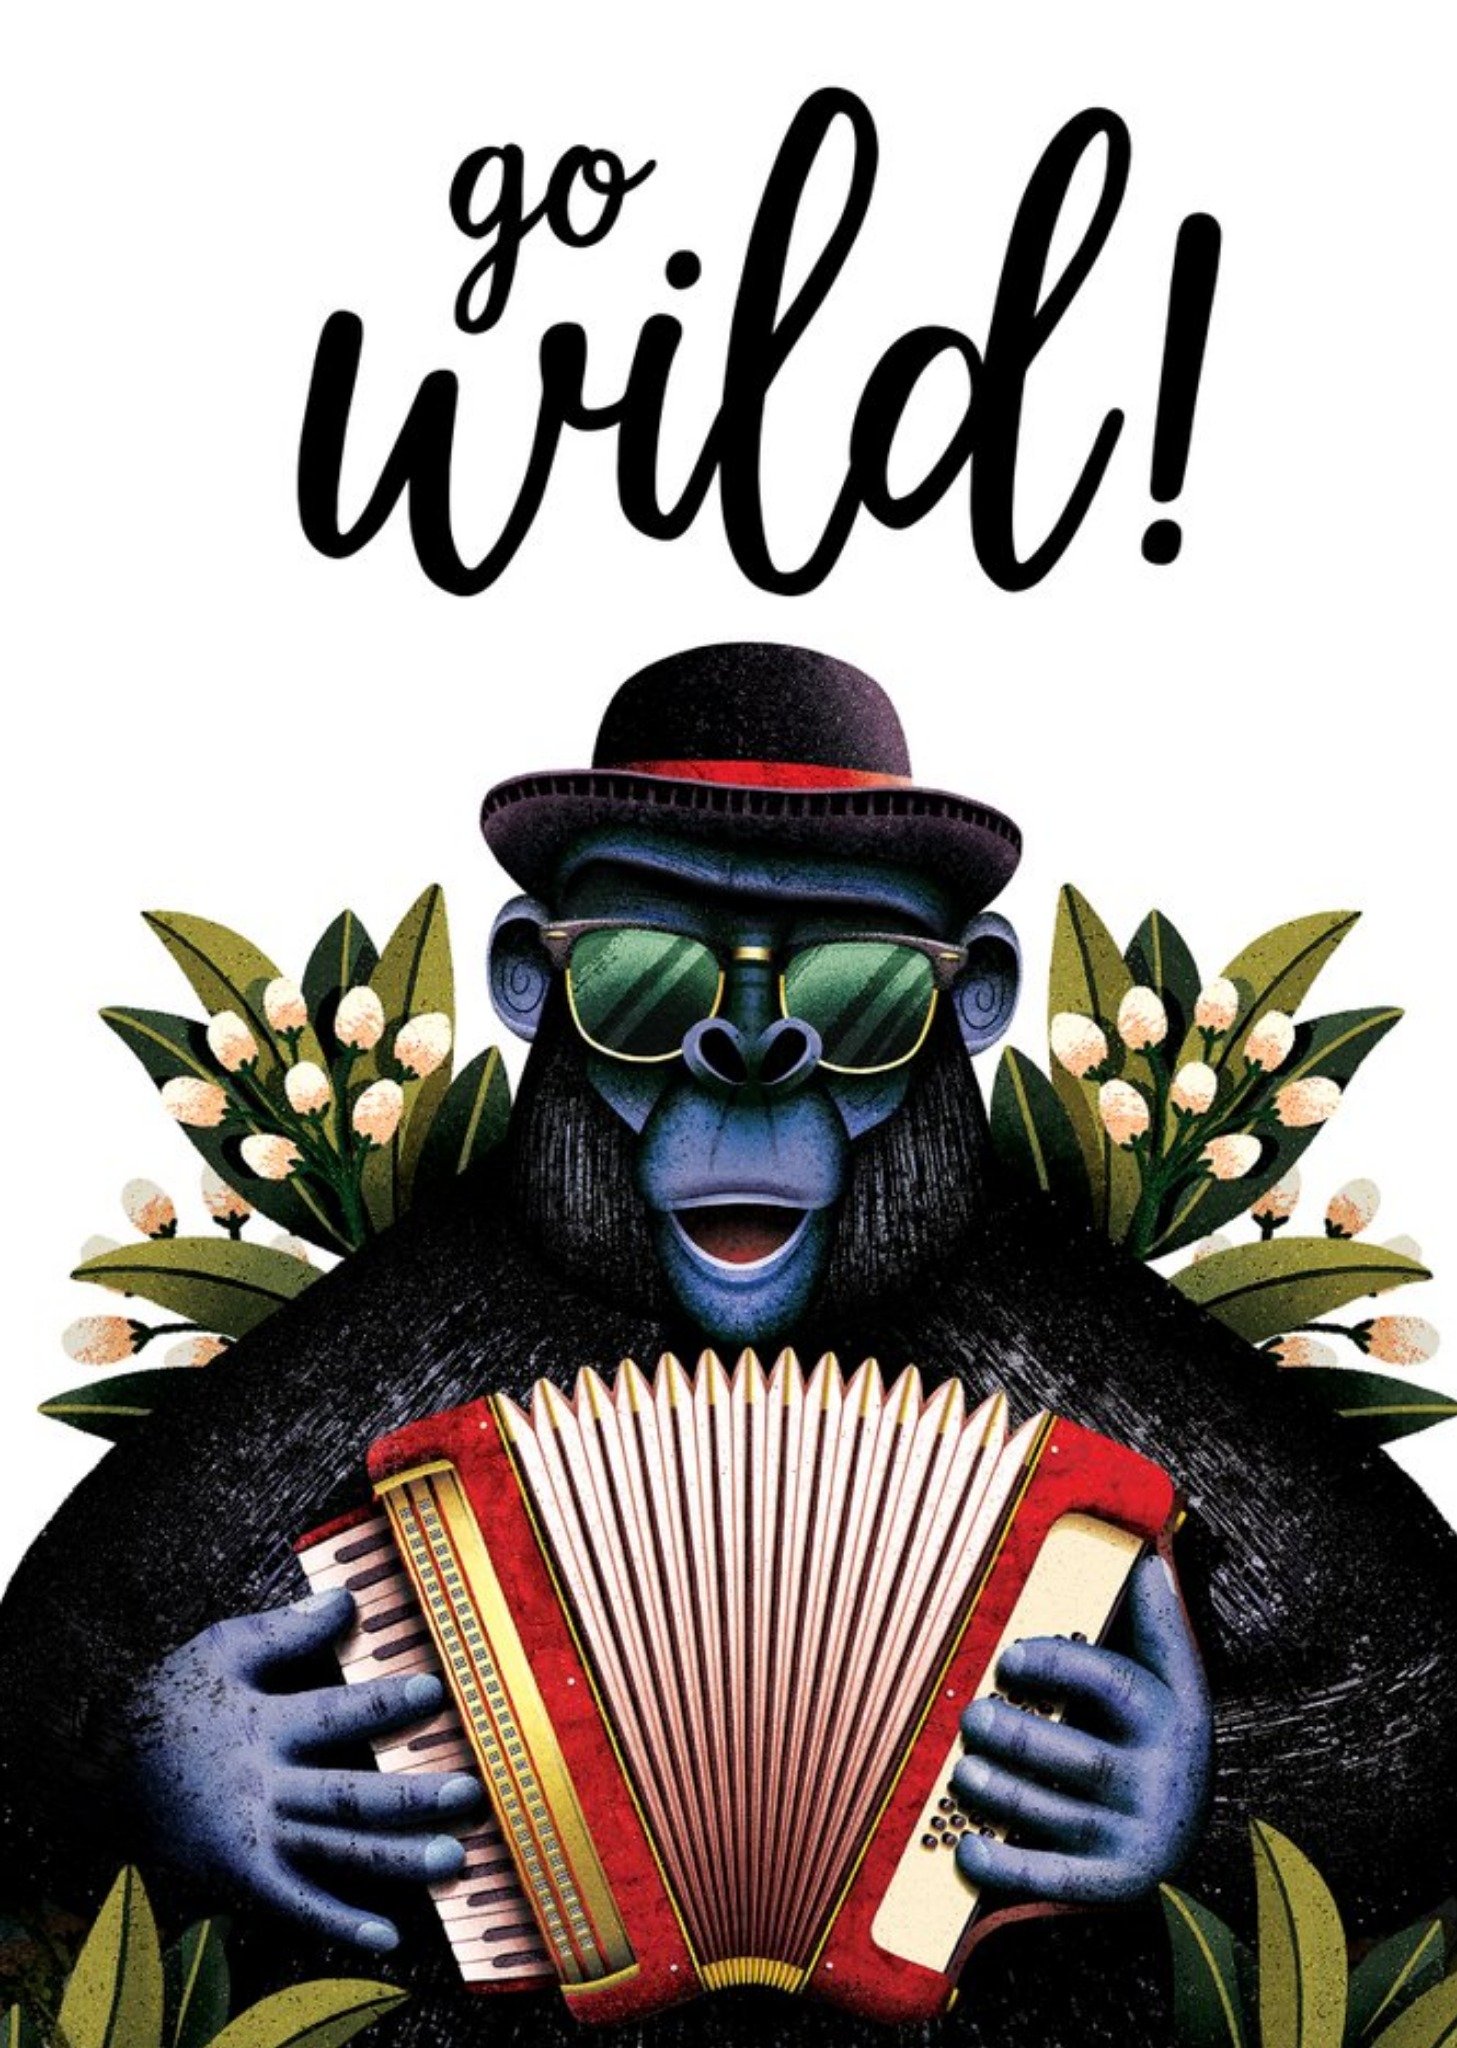 Moonpig Folio Illustration Of A Cool Ape Wearing Sunglasses And A Bowler Hat. Go Wild Birthday Card 